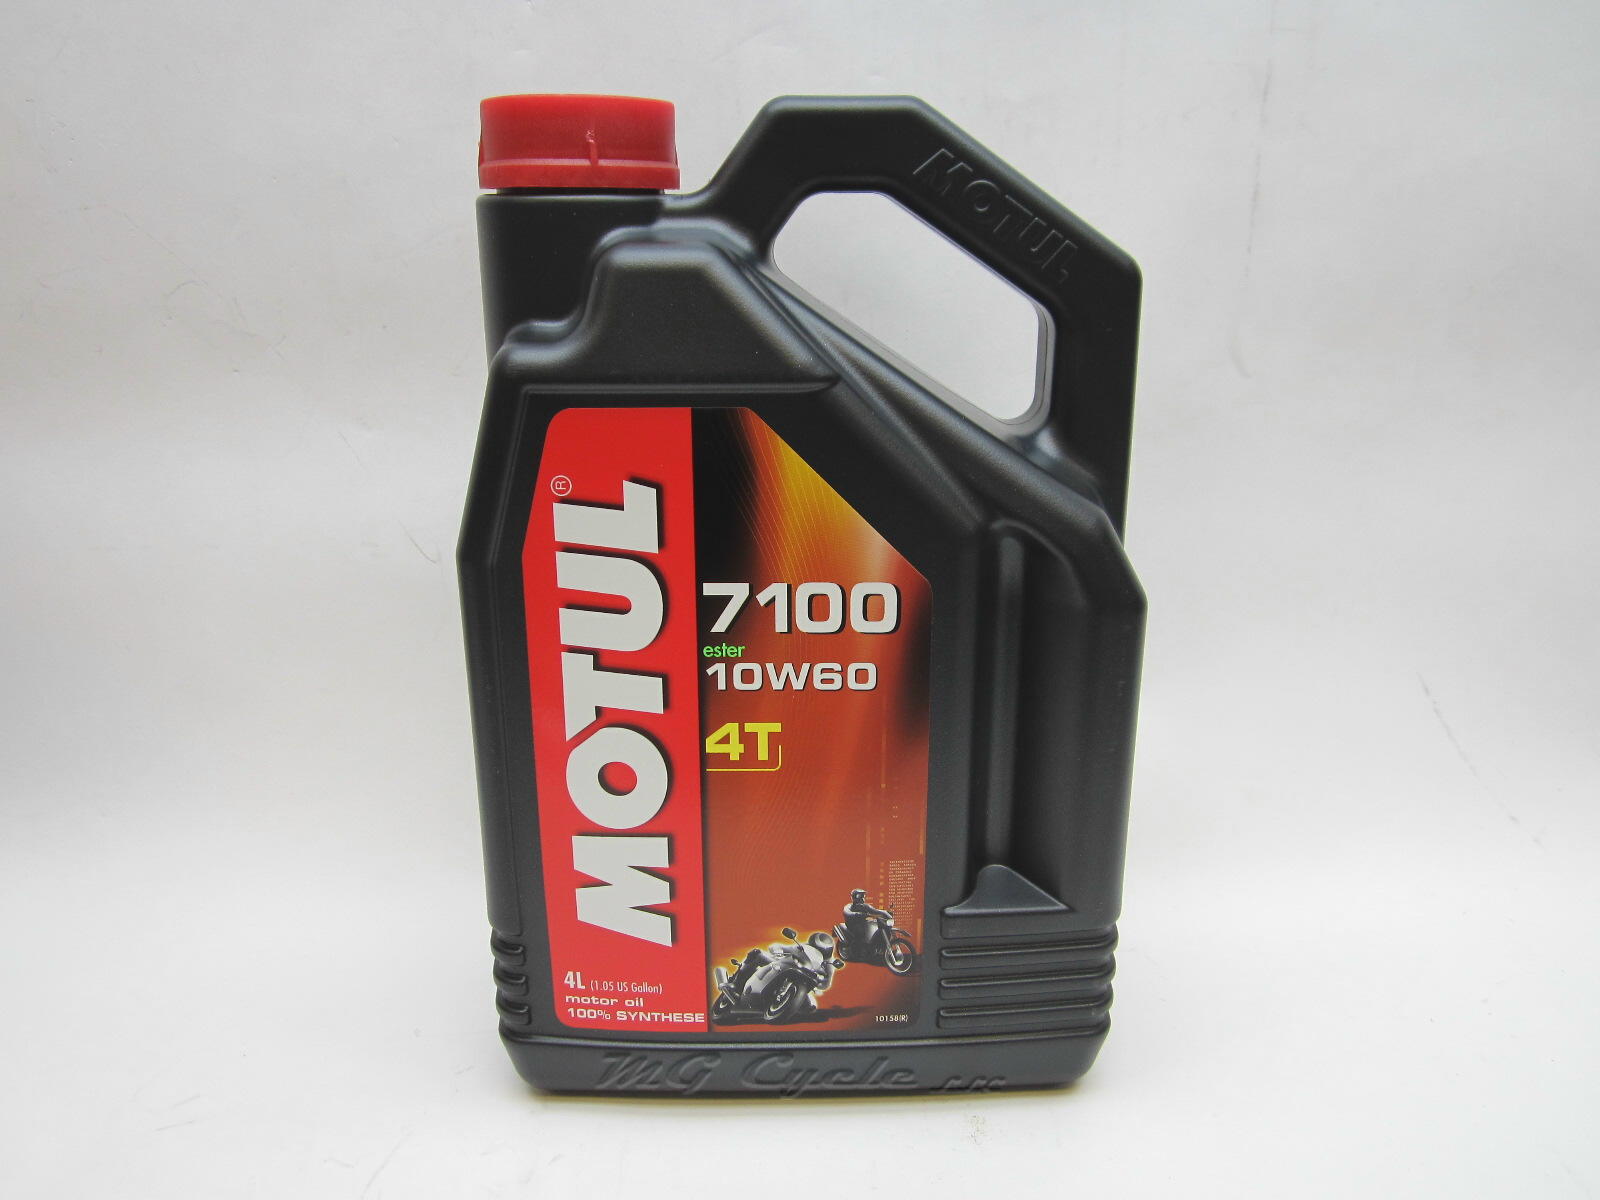 4 Liter Motul 7100 4T 10W60 synthetic ester motor oil - Click Image to Close